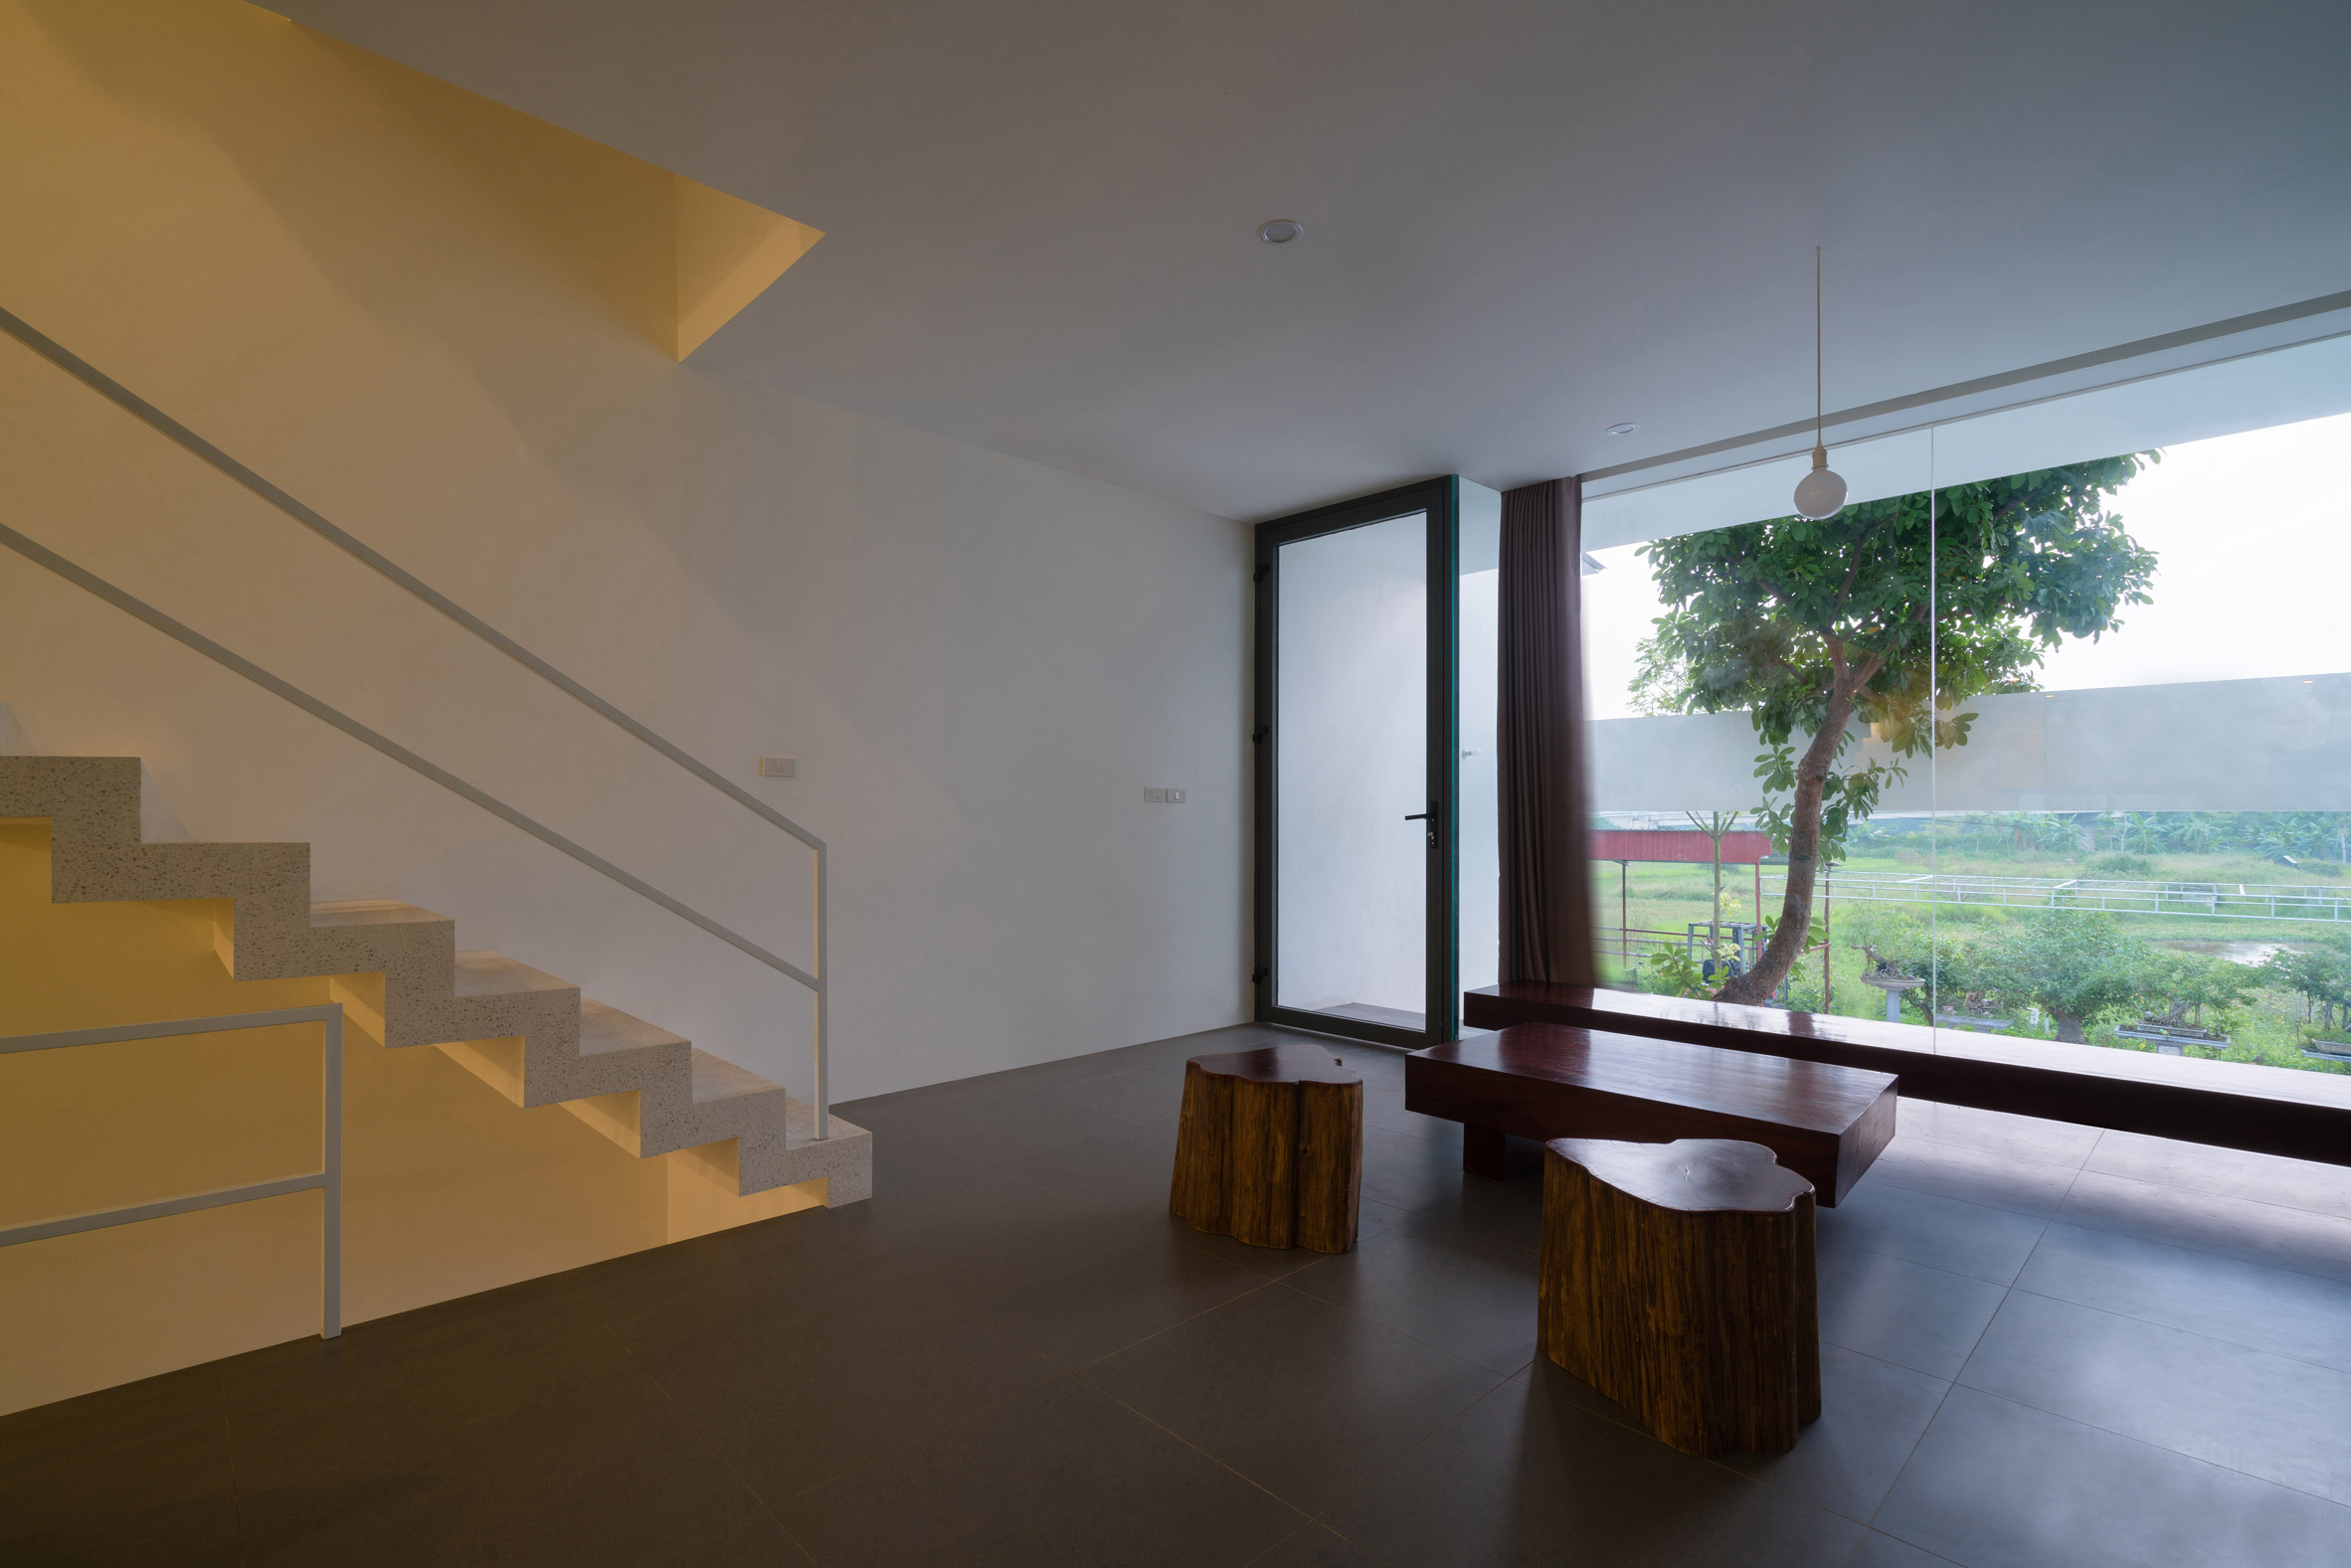 A House in the Trees by Nguyen Khac Phuoc Architects